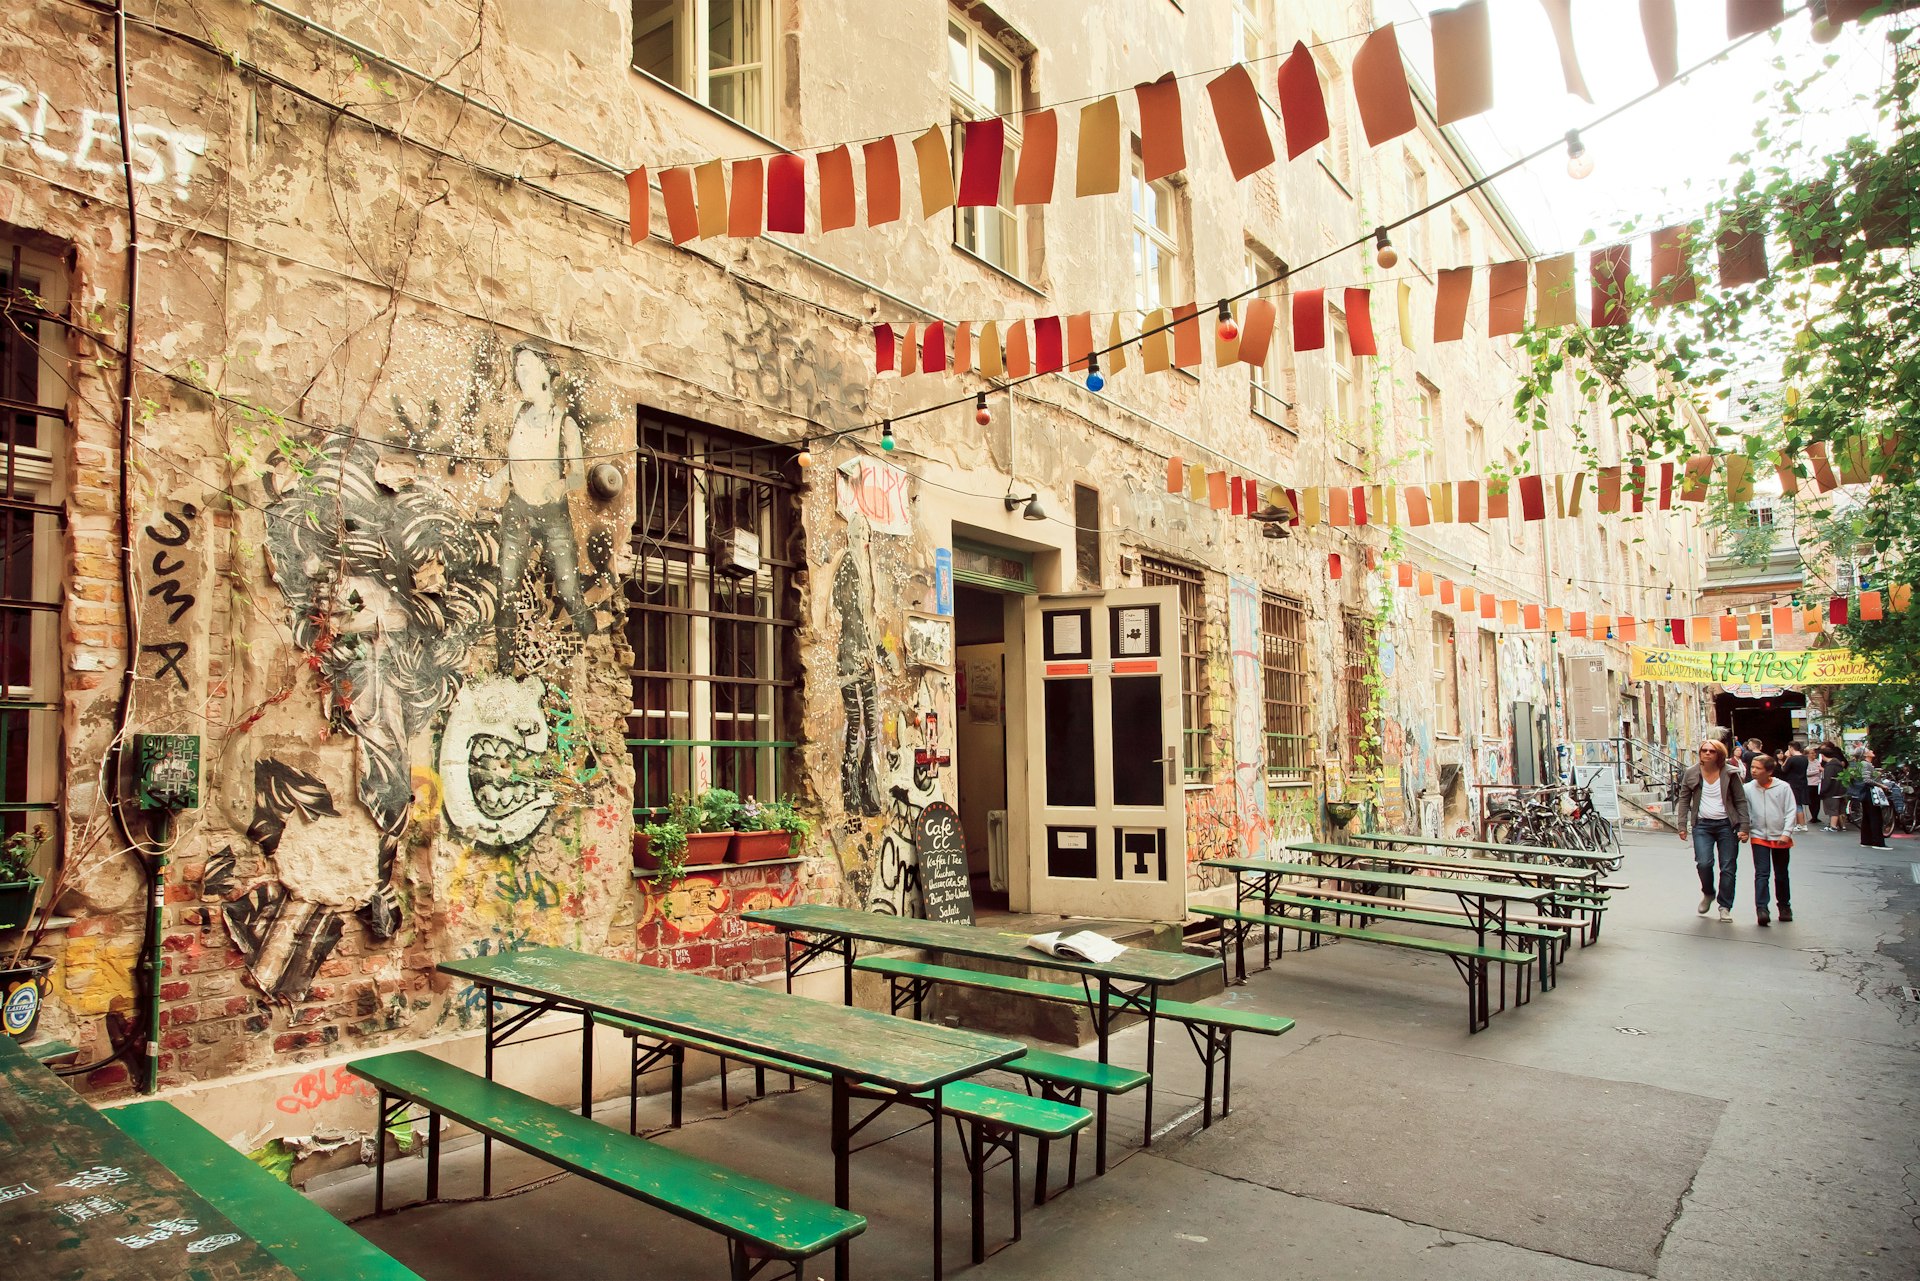 The graffiti-painted exterior of a trendy bar in Berlin. There are simple green tables and benches lined up outside and bunting is hanging up overhead.